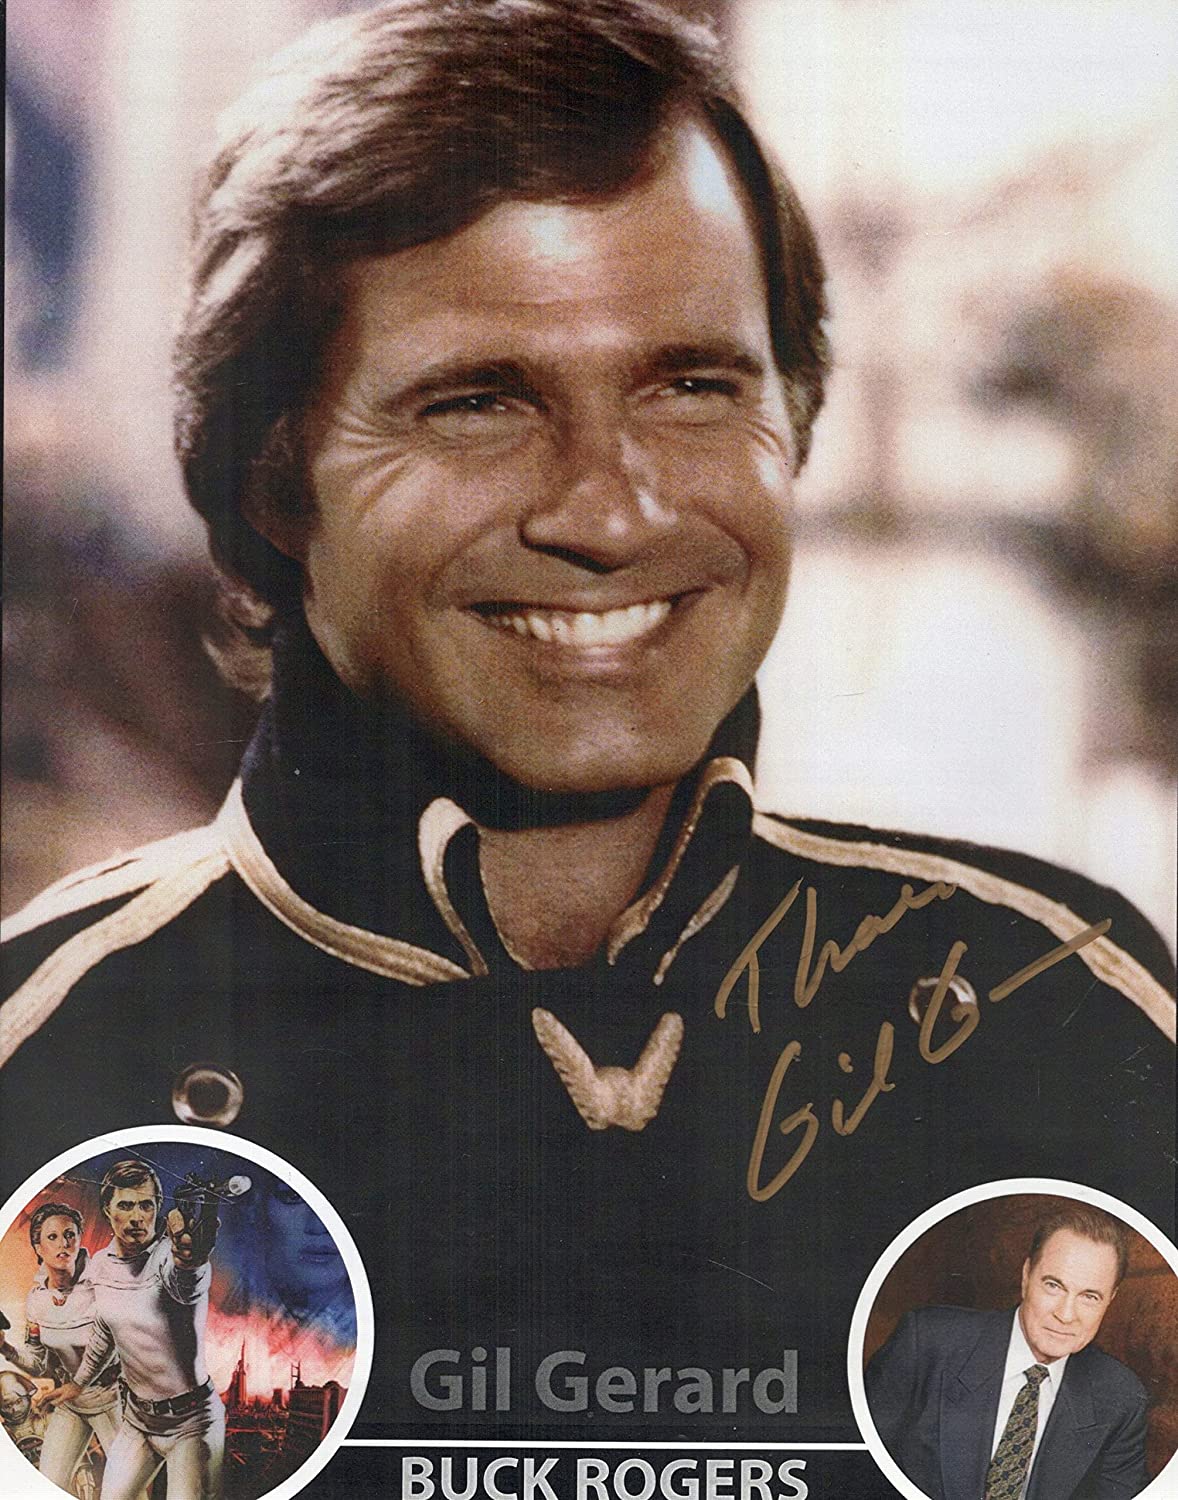 Gil Gerard (Buck Rogers) 8.5in x 11in AUTOGRAPH Paper gold-sharpie